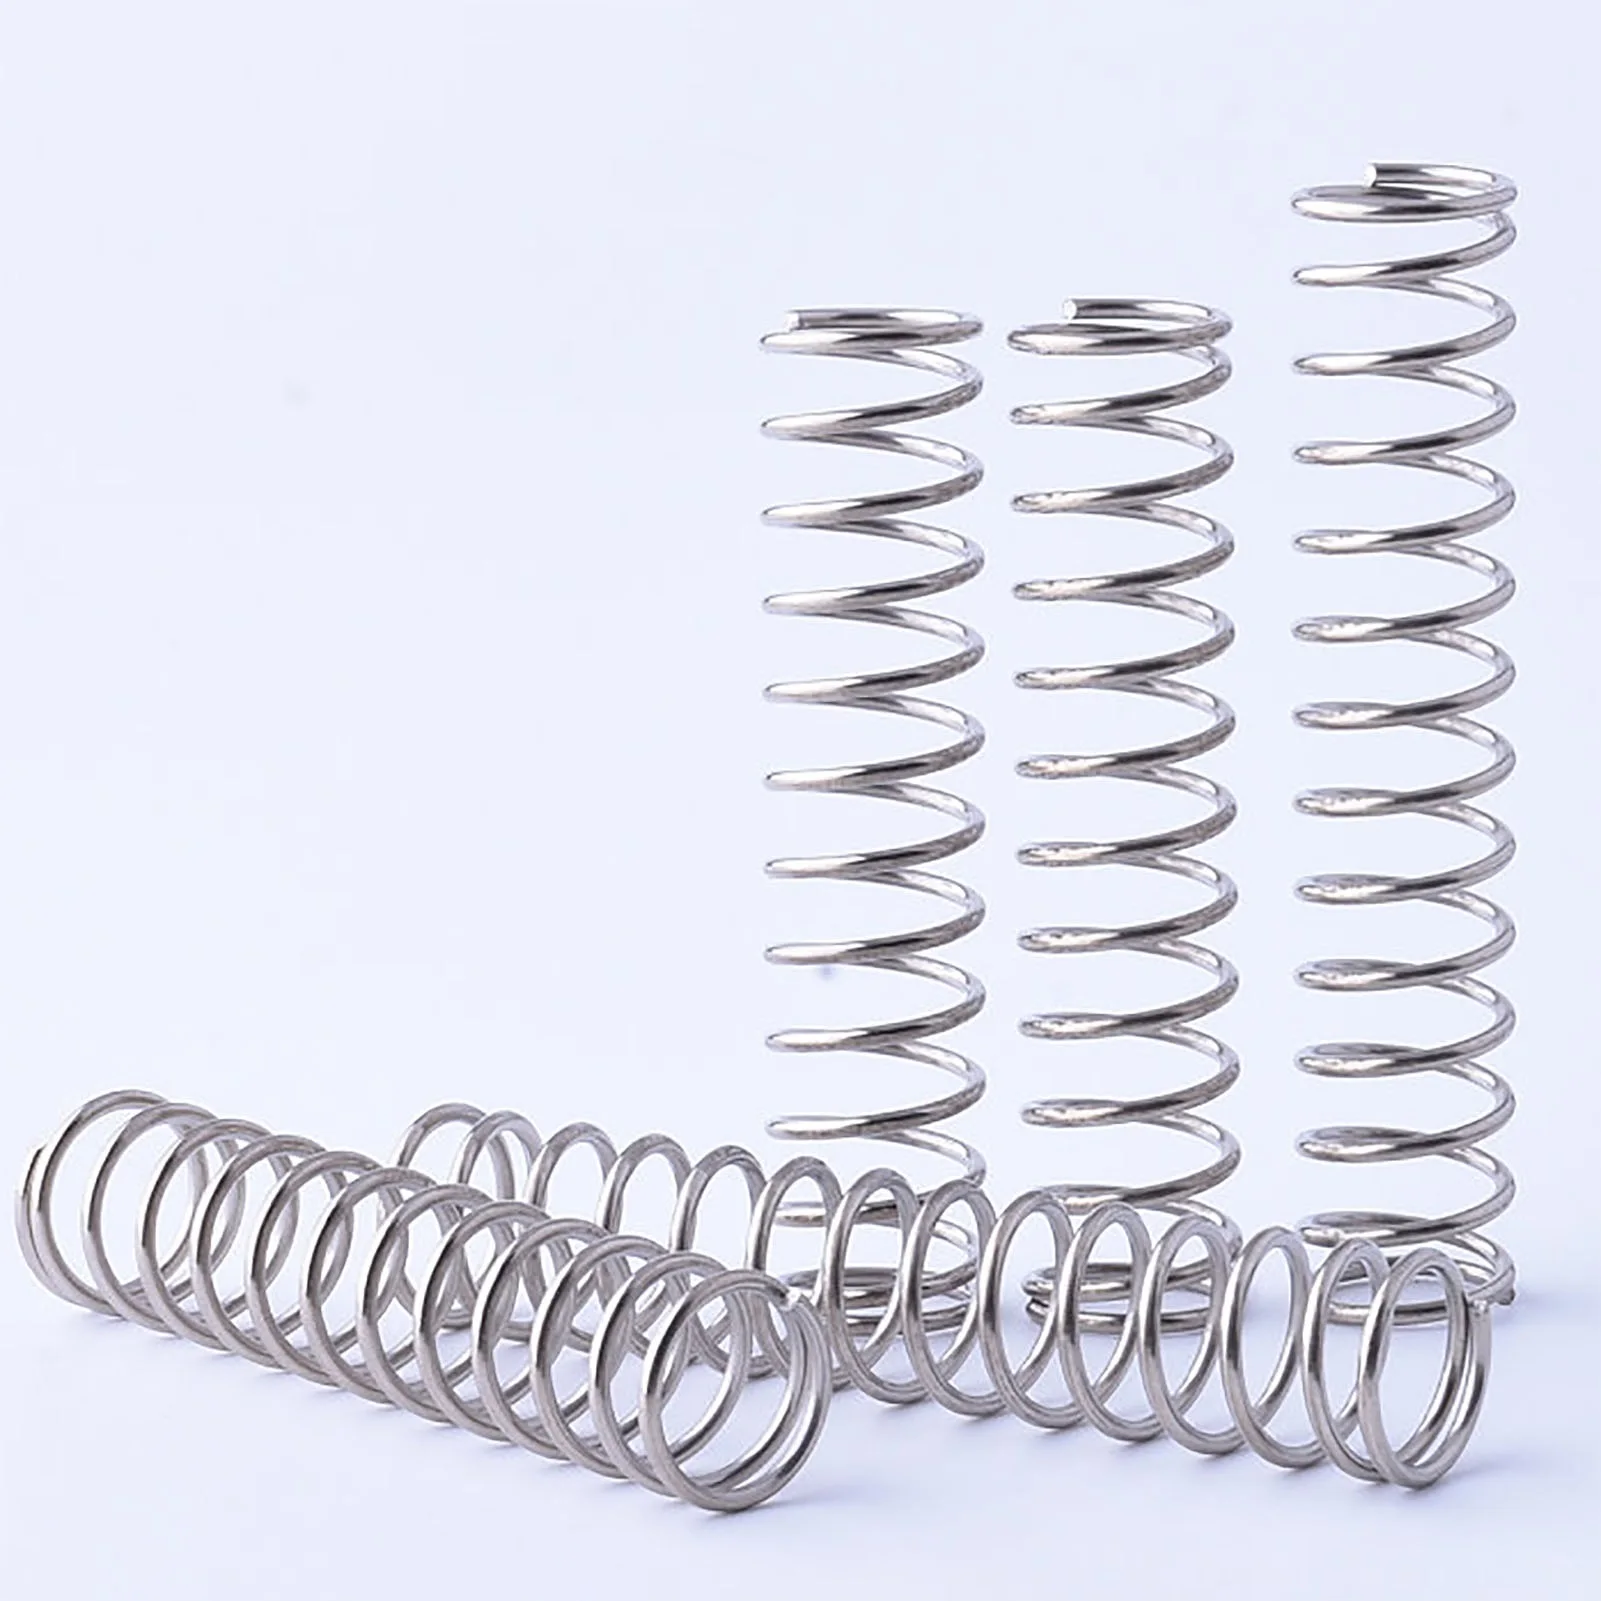 

5PCS 1.8x18mm Compression Spring, Wire Diameter 0.07'', Outer Diameter 0.71'', Free Length 0.39''-2'', Stainless Steel